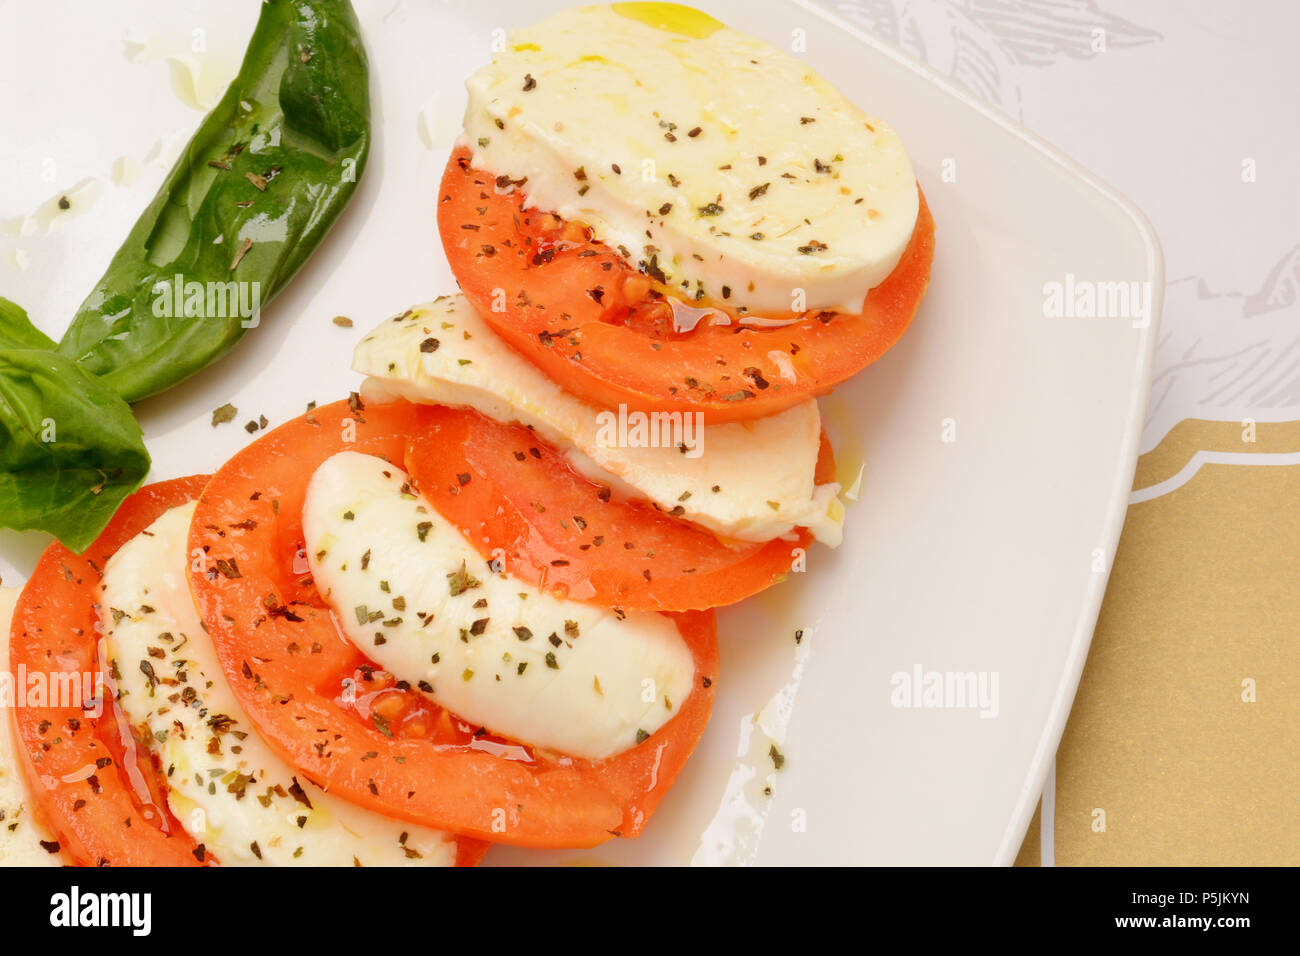 Delicious caprese salad with ripe tomatoes and mozzarella cheese with fresh basil leaves. Italian food. Stock Photo